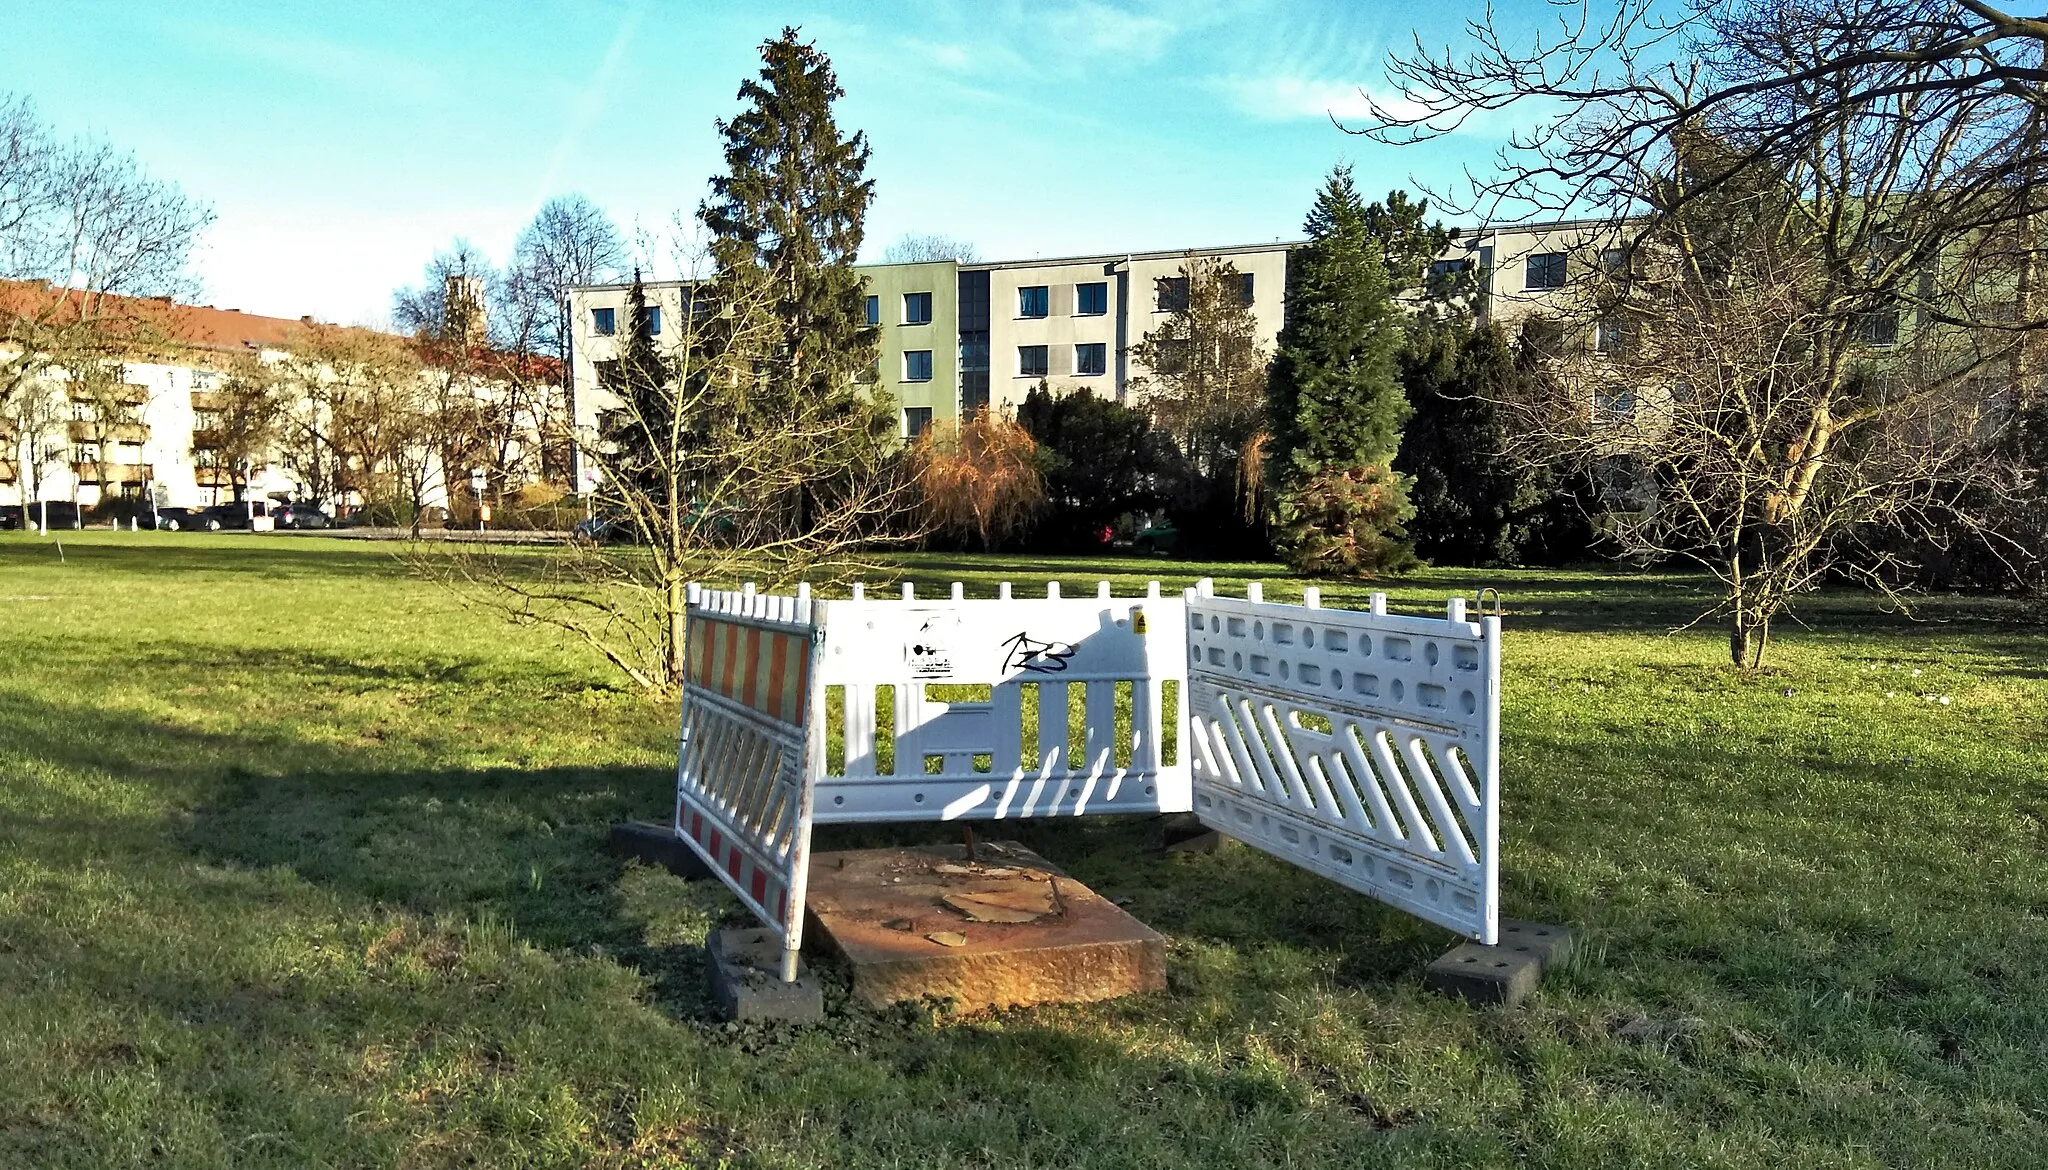 Photo showing: Fenced socle without the sculpture "Dancing couple" at the S-Bahn station Berlin-Plänterwald, Germany.